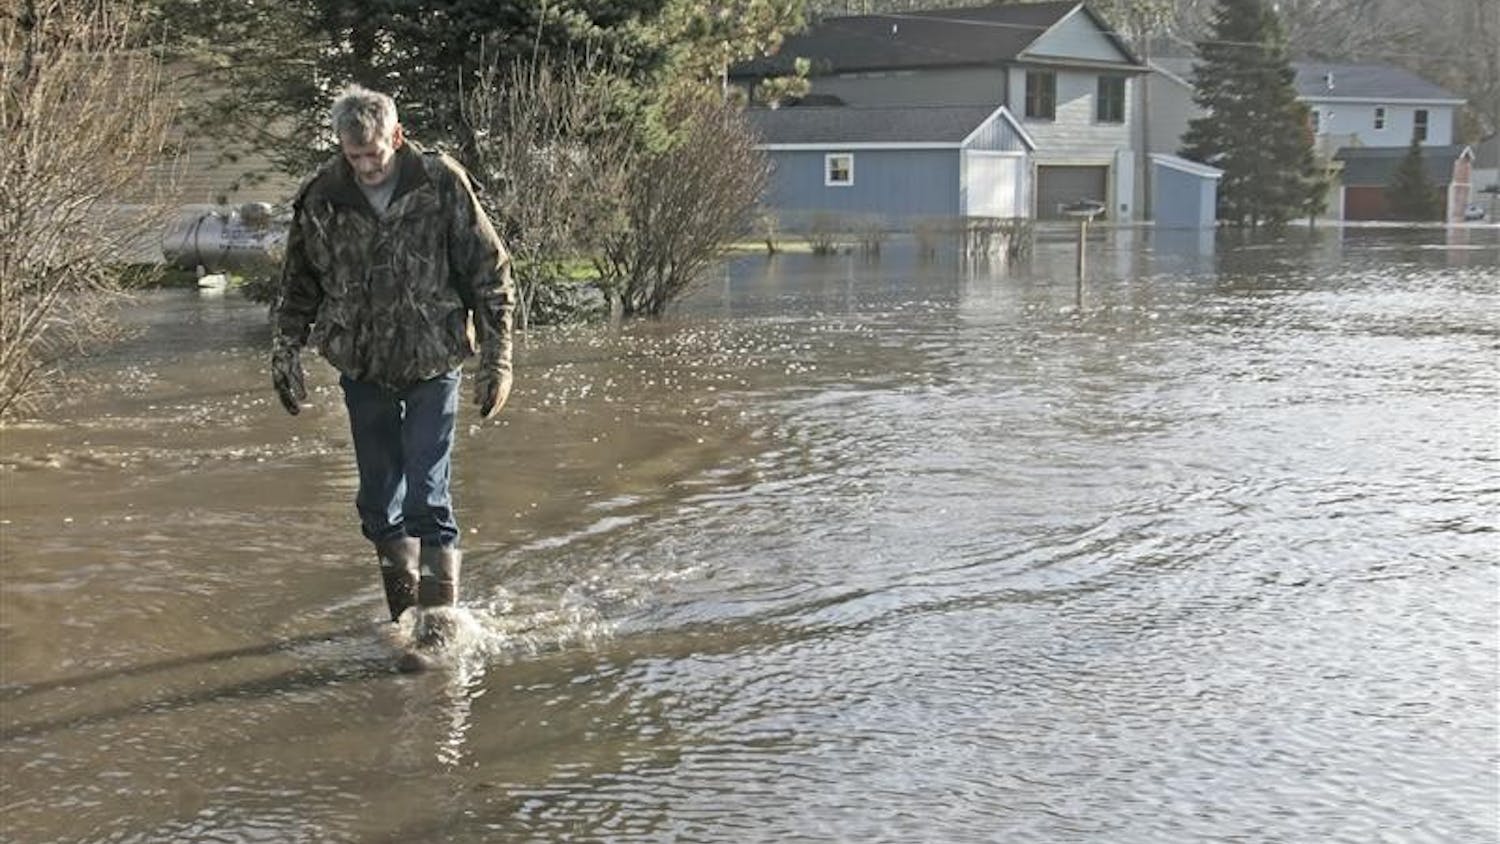 Steve Clark walks back after checking on his home as the Tippecanoe River still rises Wednesday, March 11, 2009, near Delphi, Ind. Clark left his home early Wednesday morning after the water rose too high. 